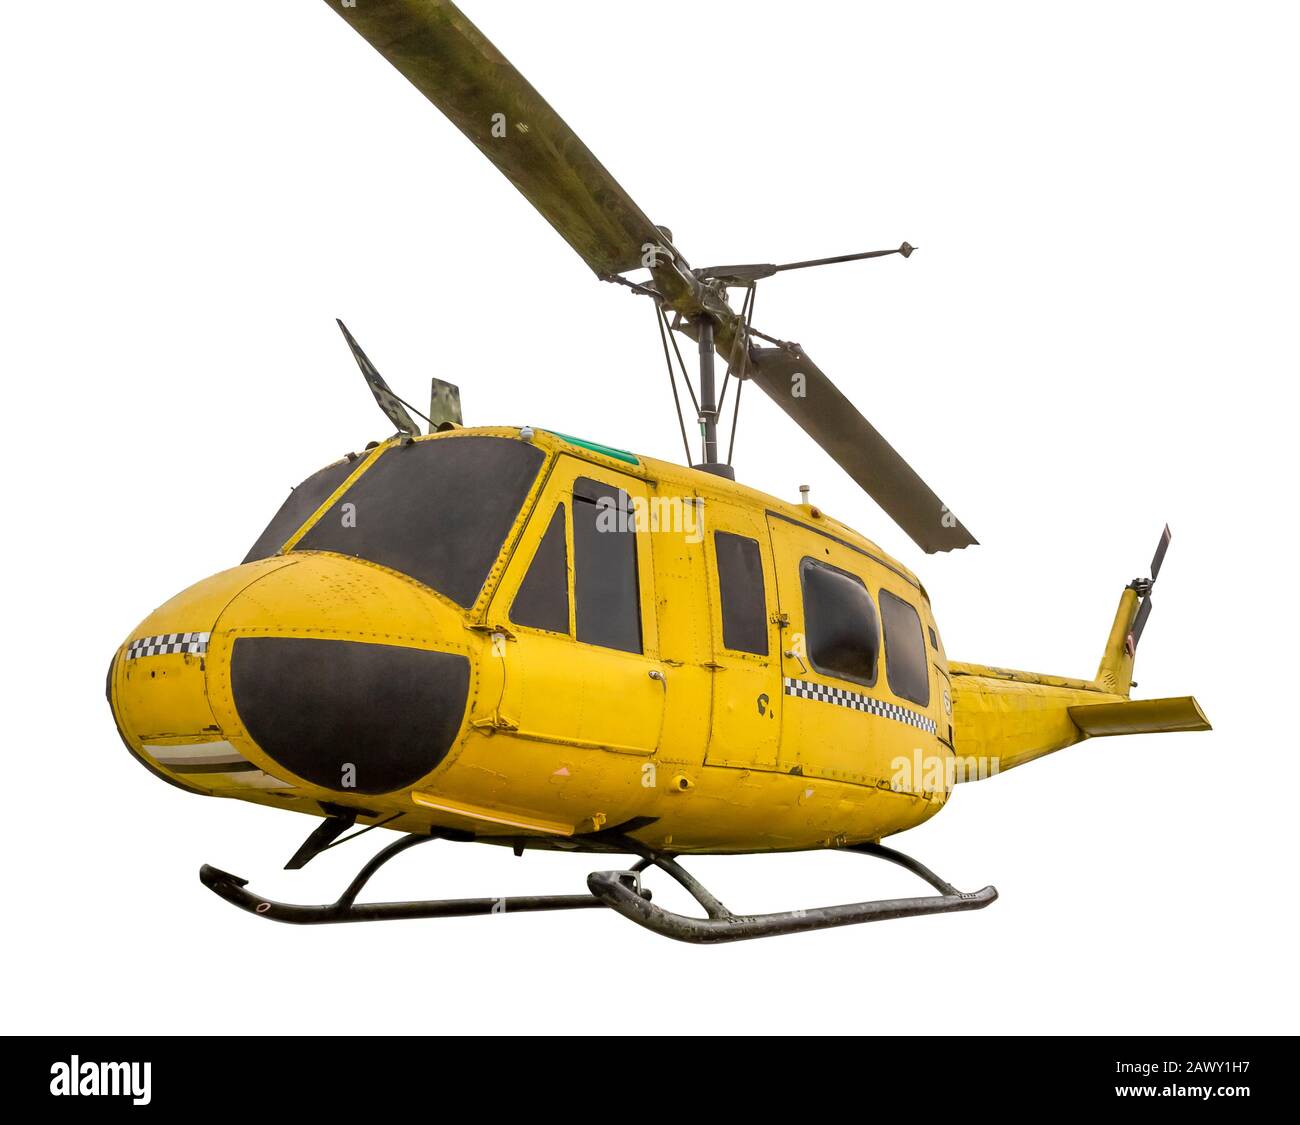 historic yellow helicopter isolated in white back Stock Photo